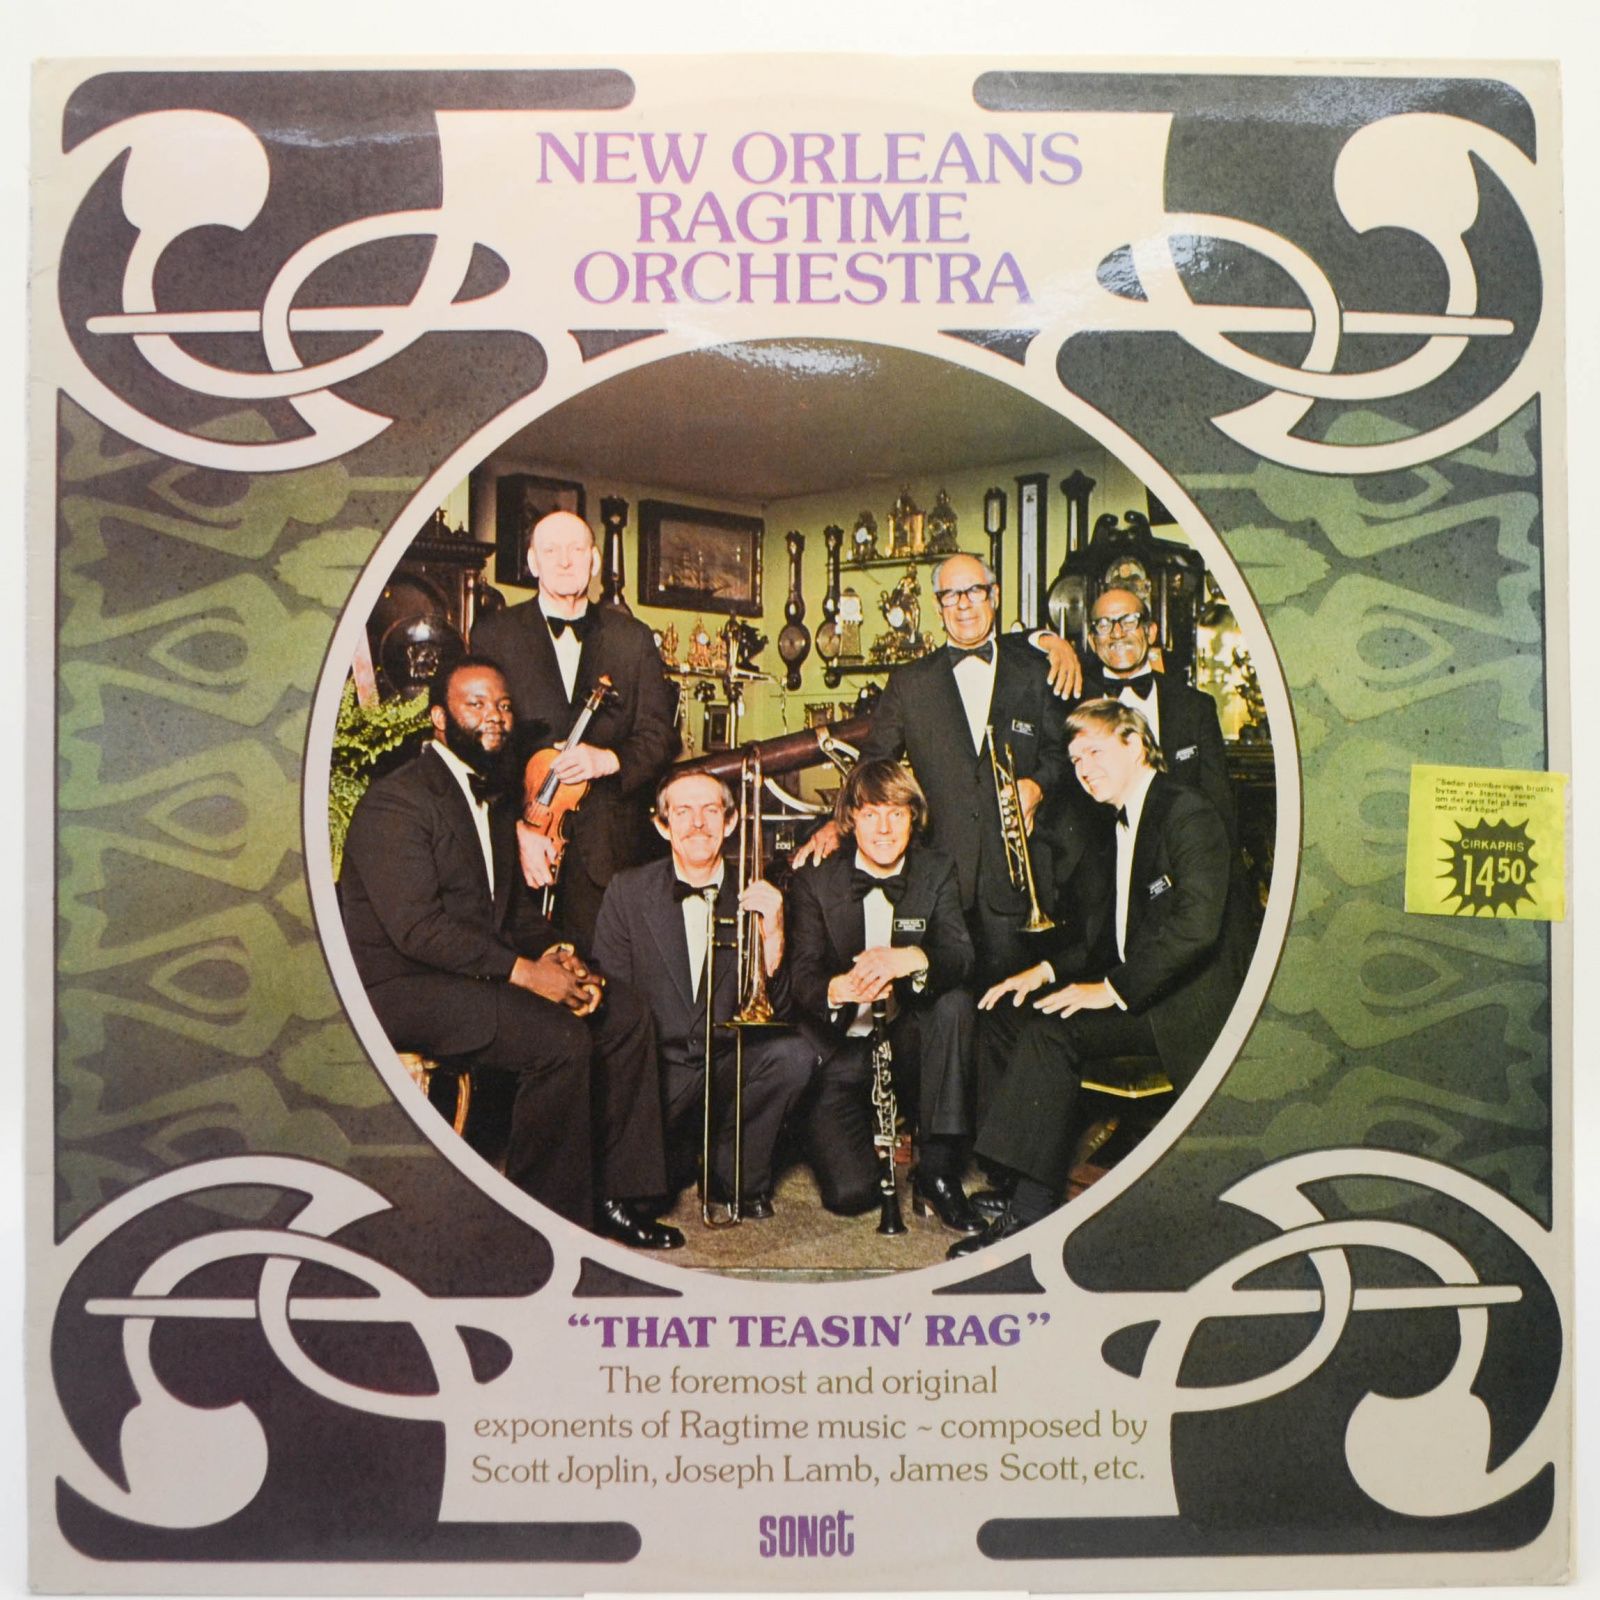 New Orleans Ragtime Orchestra — The New Orleans Ragtime Orchestra (UK), 1974